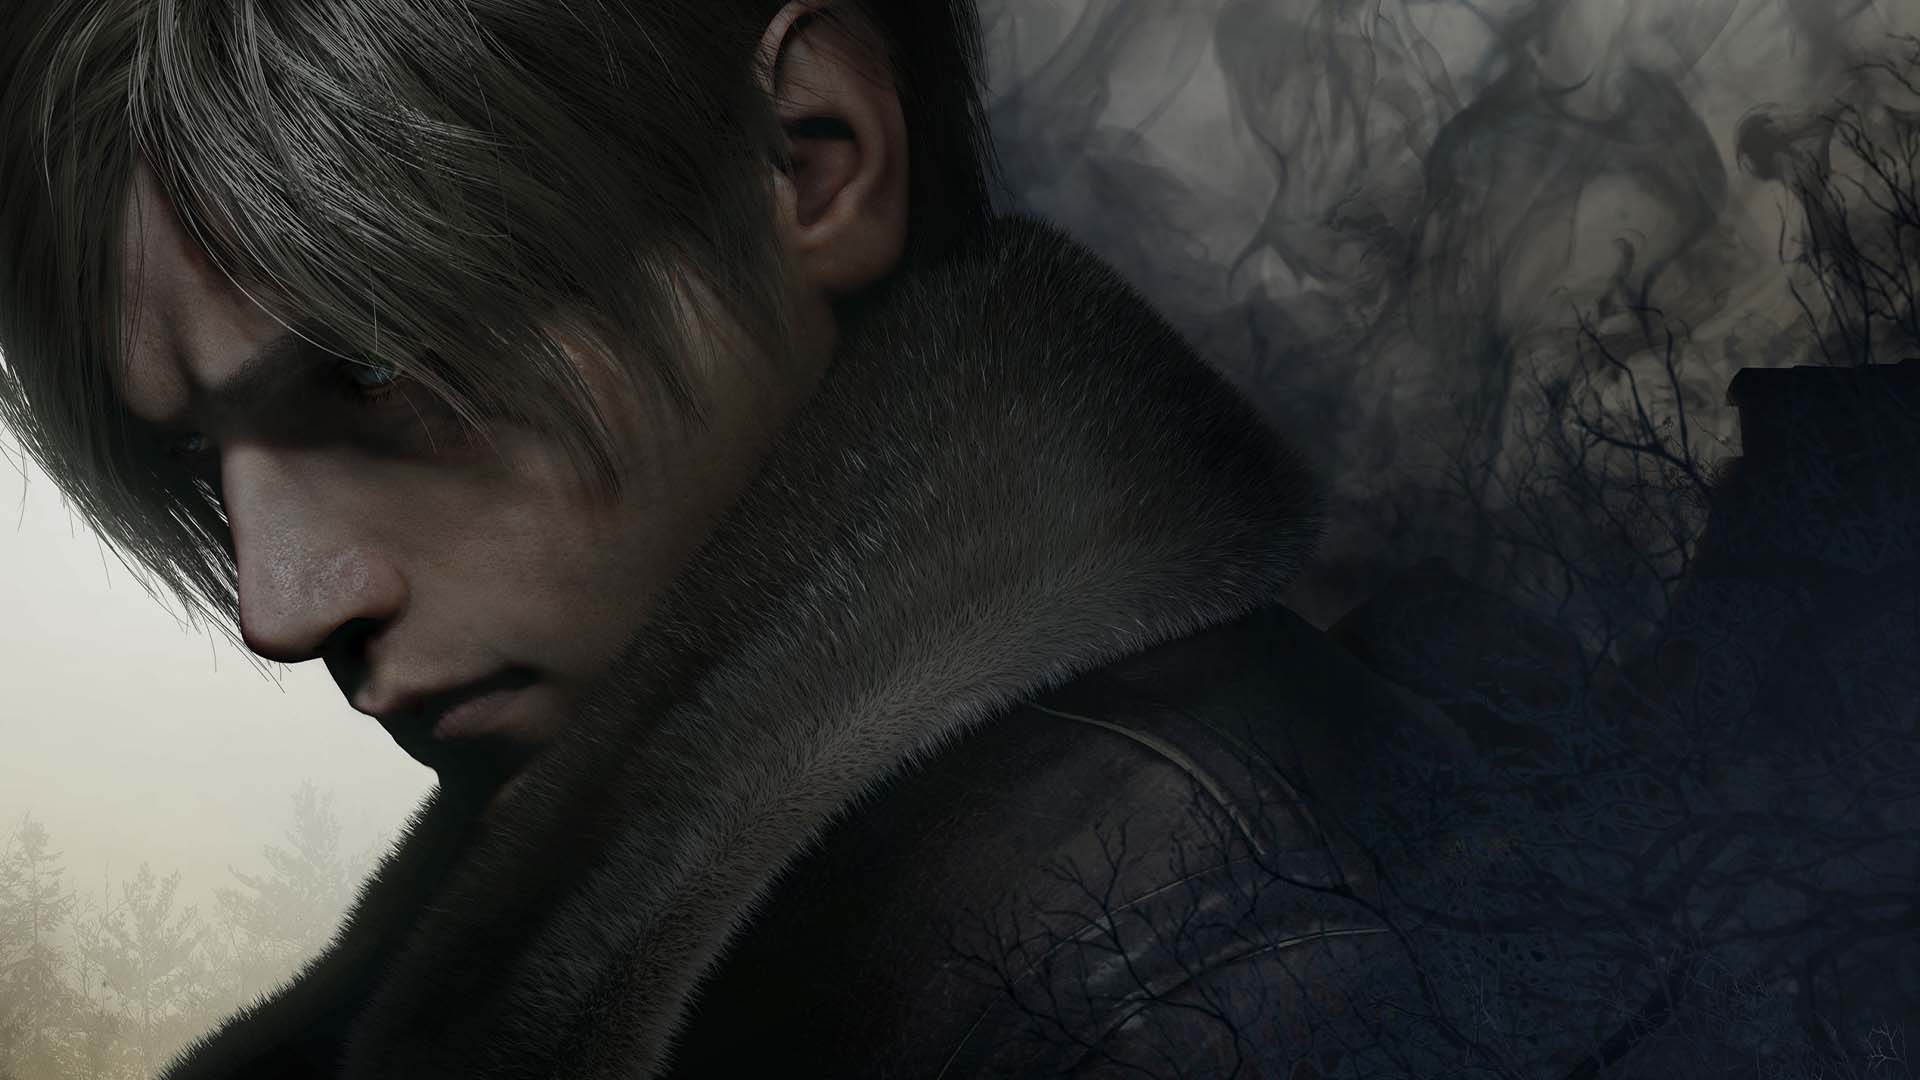 Resident Evil 4 on PS4 will come with free PS5 upgrade at launch